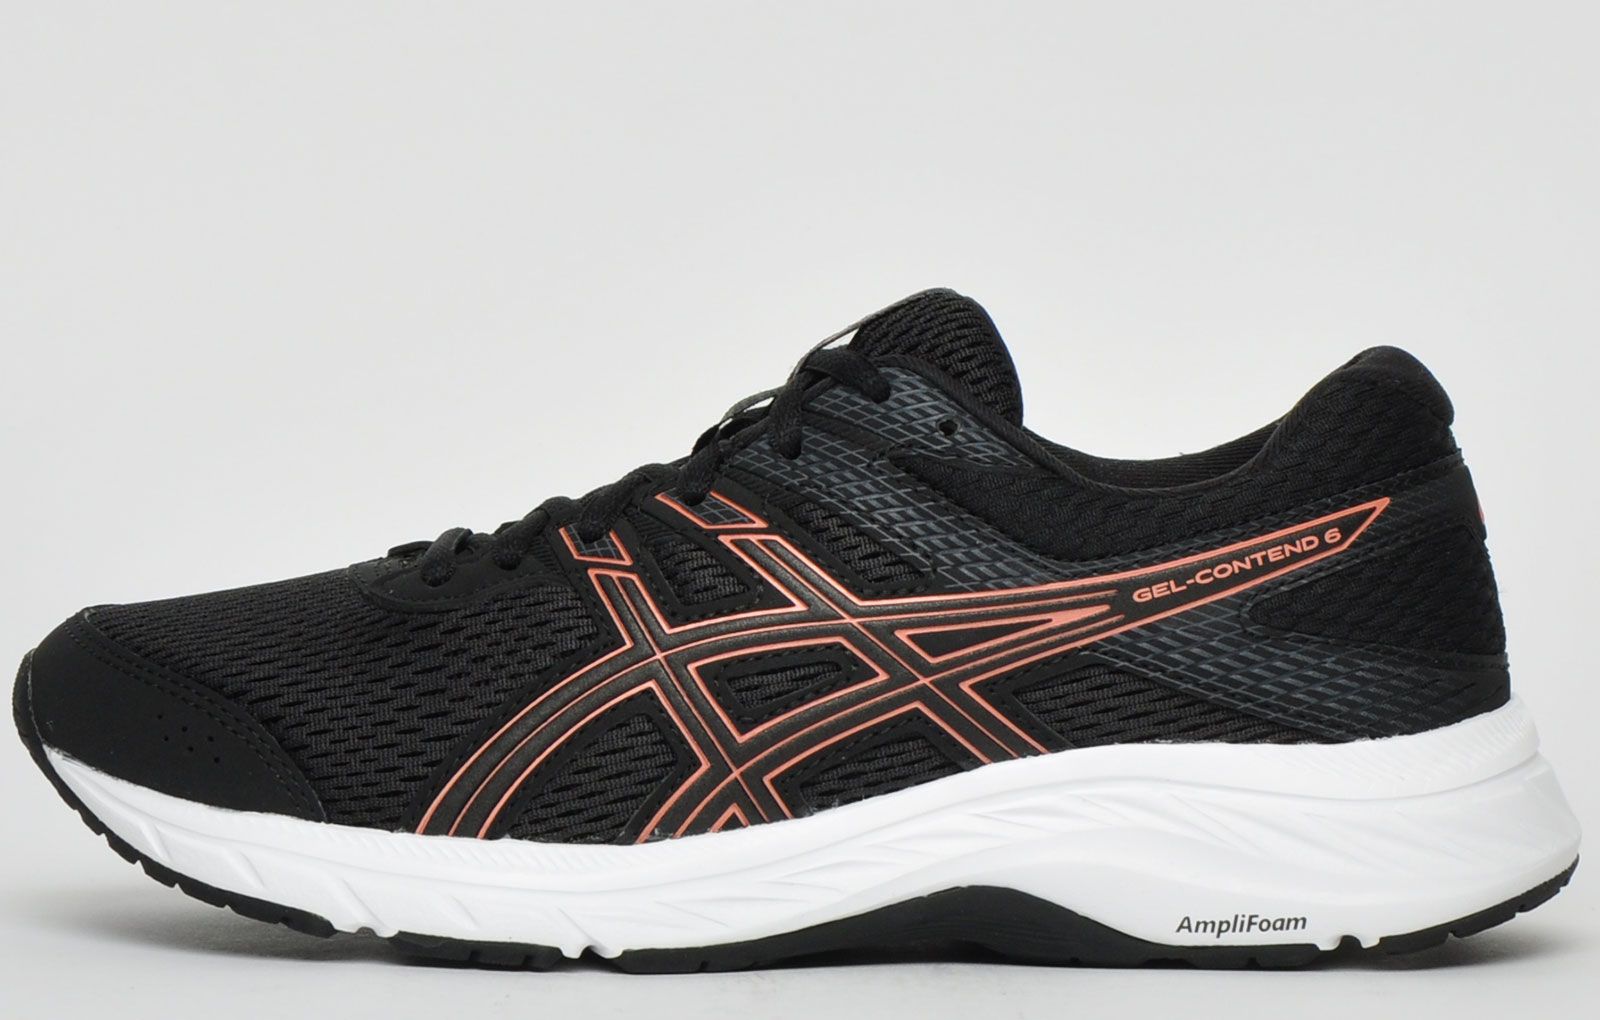 The Asics Gel Contend 6 is a running shoe that is packed with features designed to bring out your optimum level of performance. <p class=